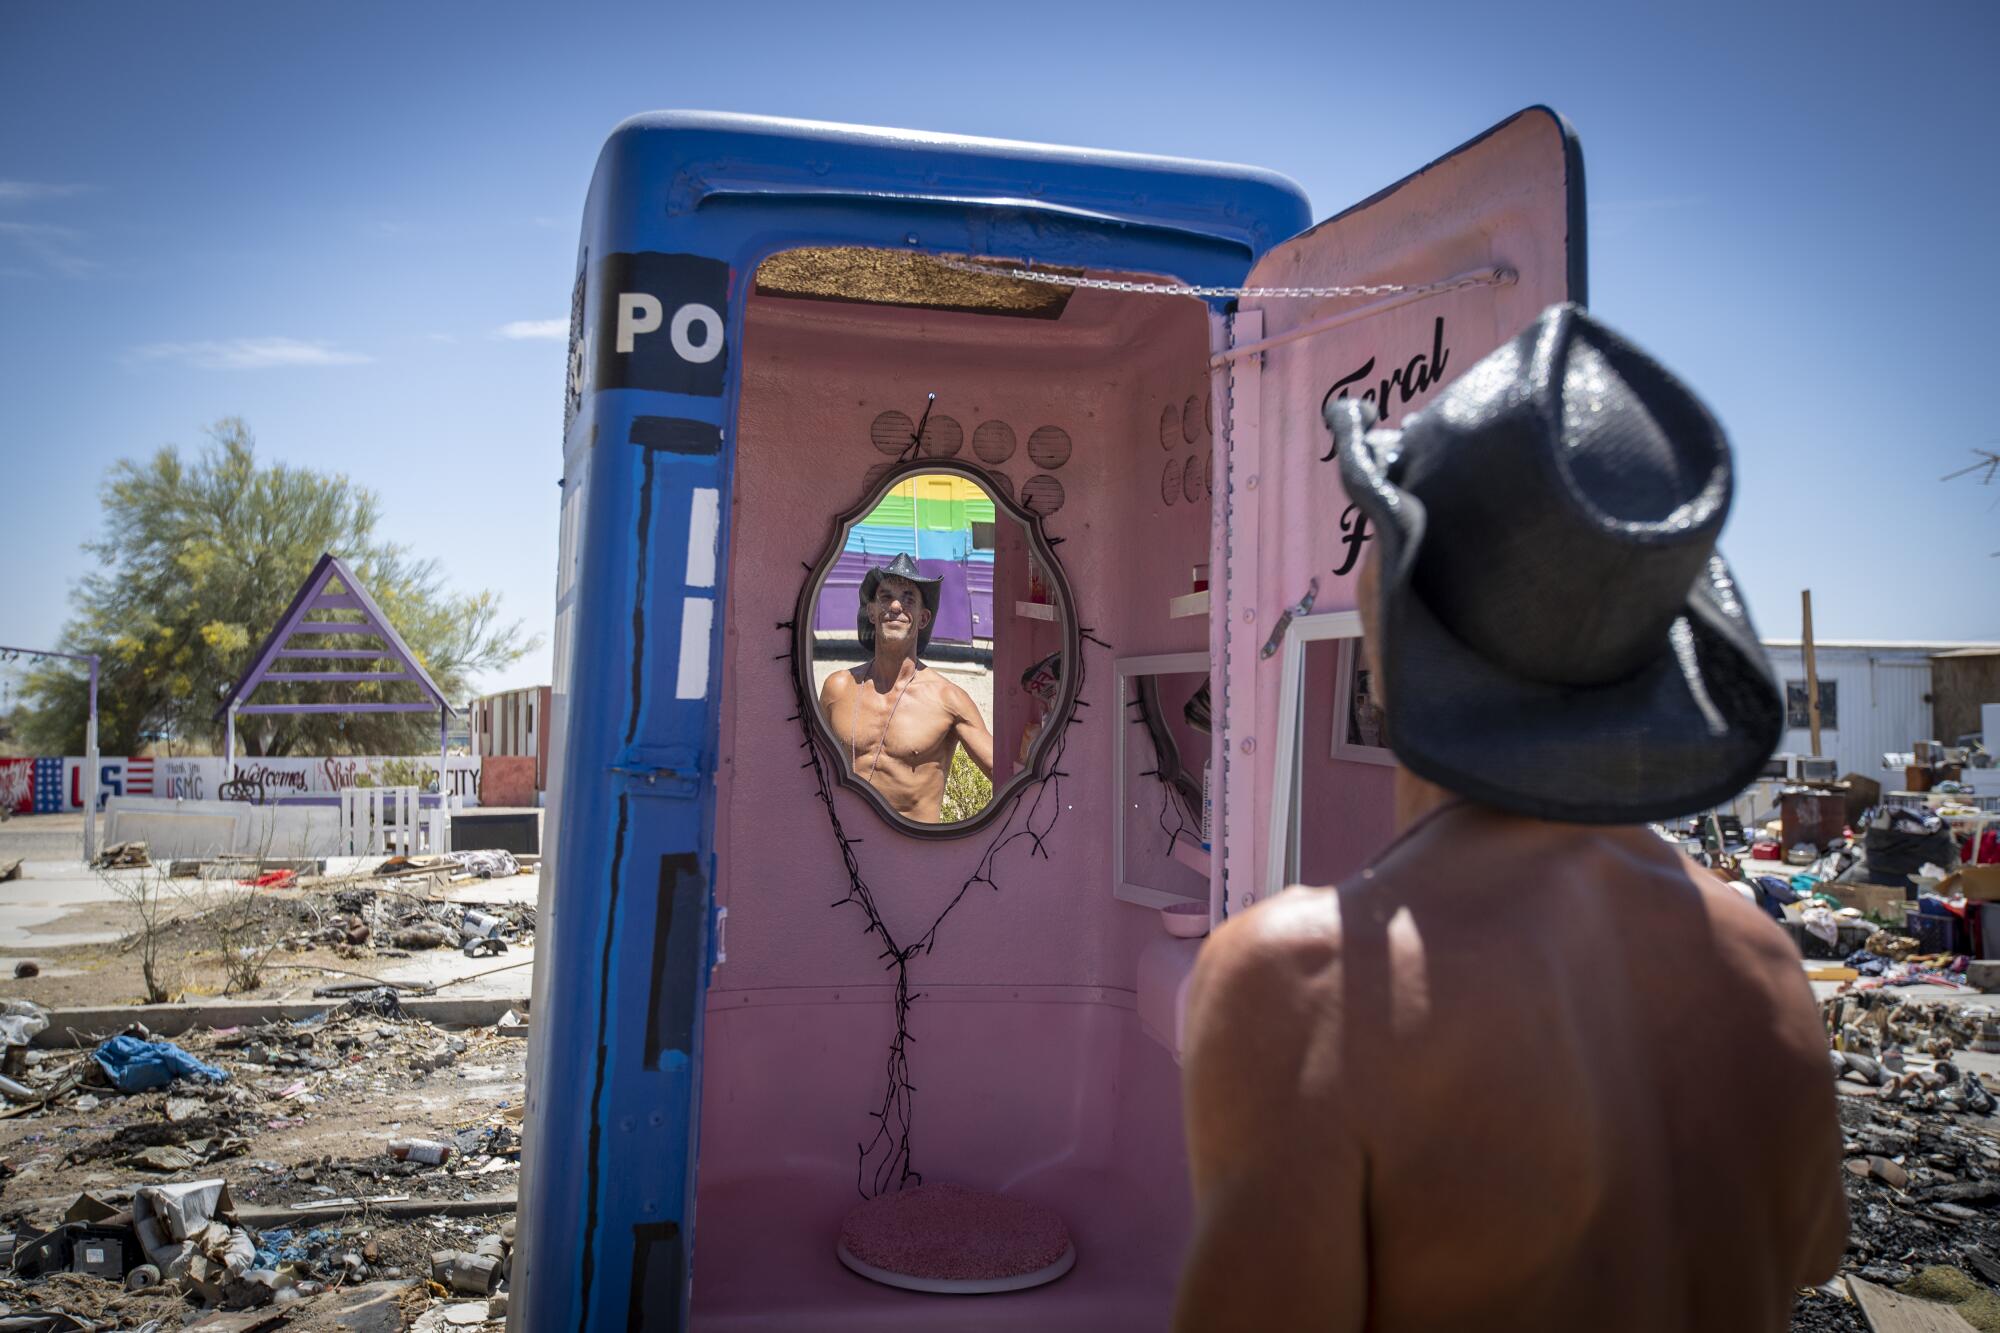 A shirtless man in a cowboy hat looks into a mirror inside a pink and blue painted portable toilet 